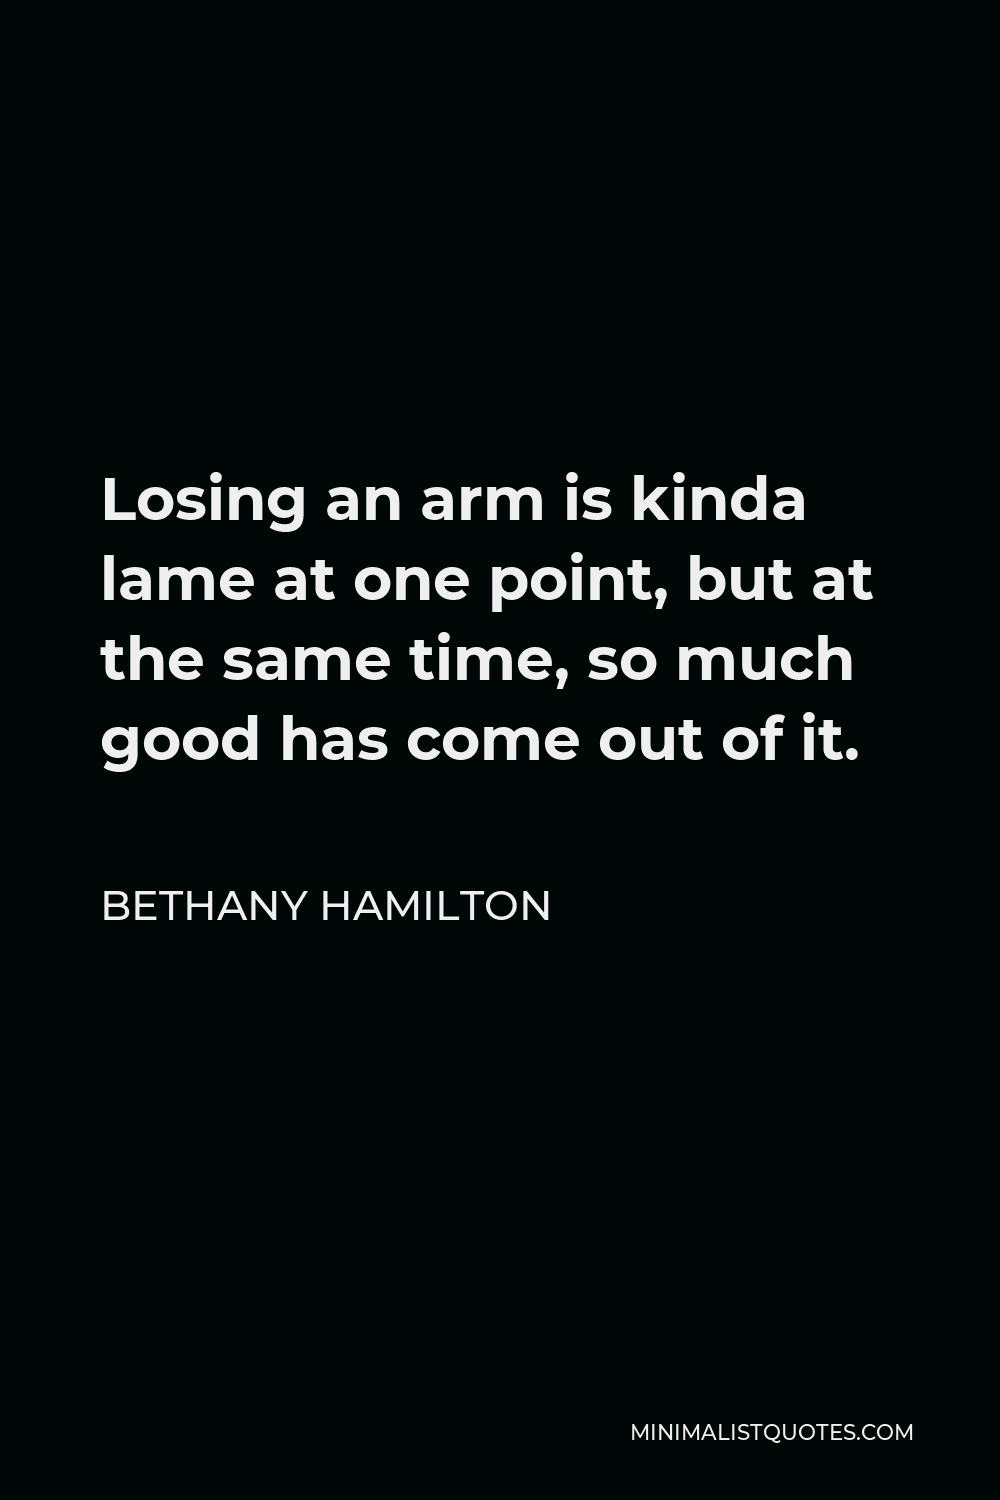 Bethany Hamilton Quote - Losing an arm is kinda lame at one point, but at the same time, so much good has come out of it.